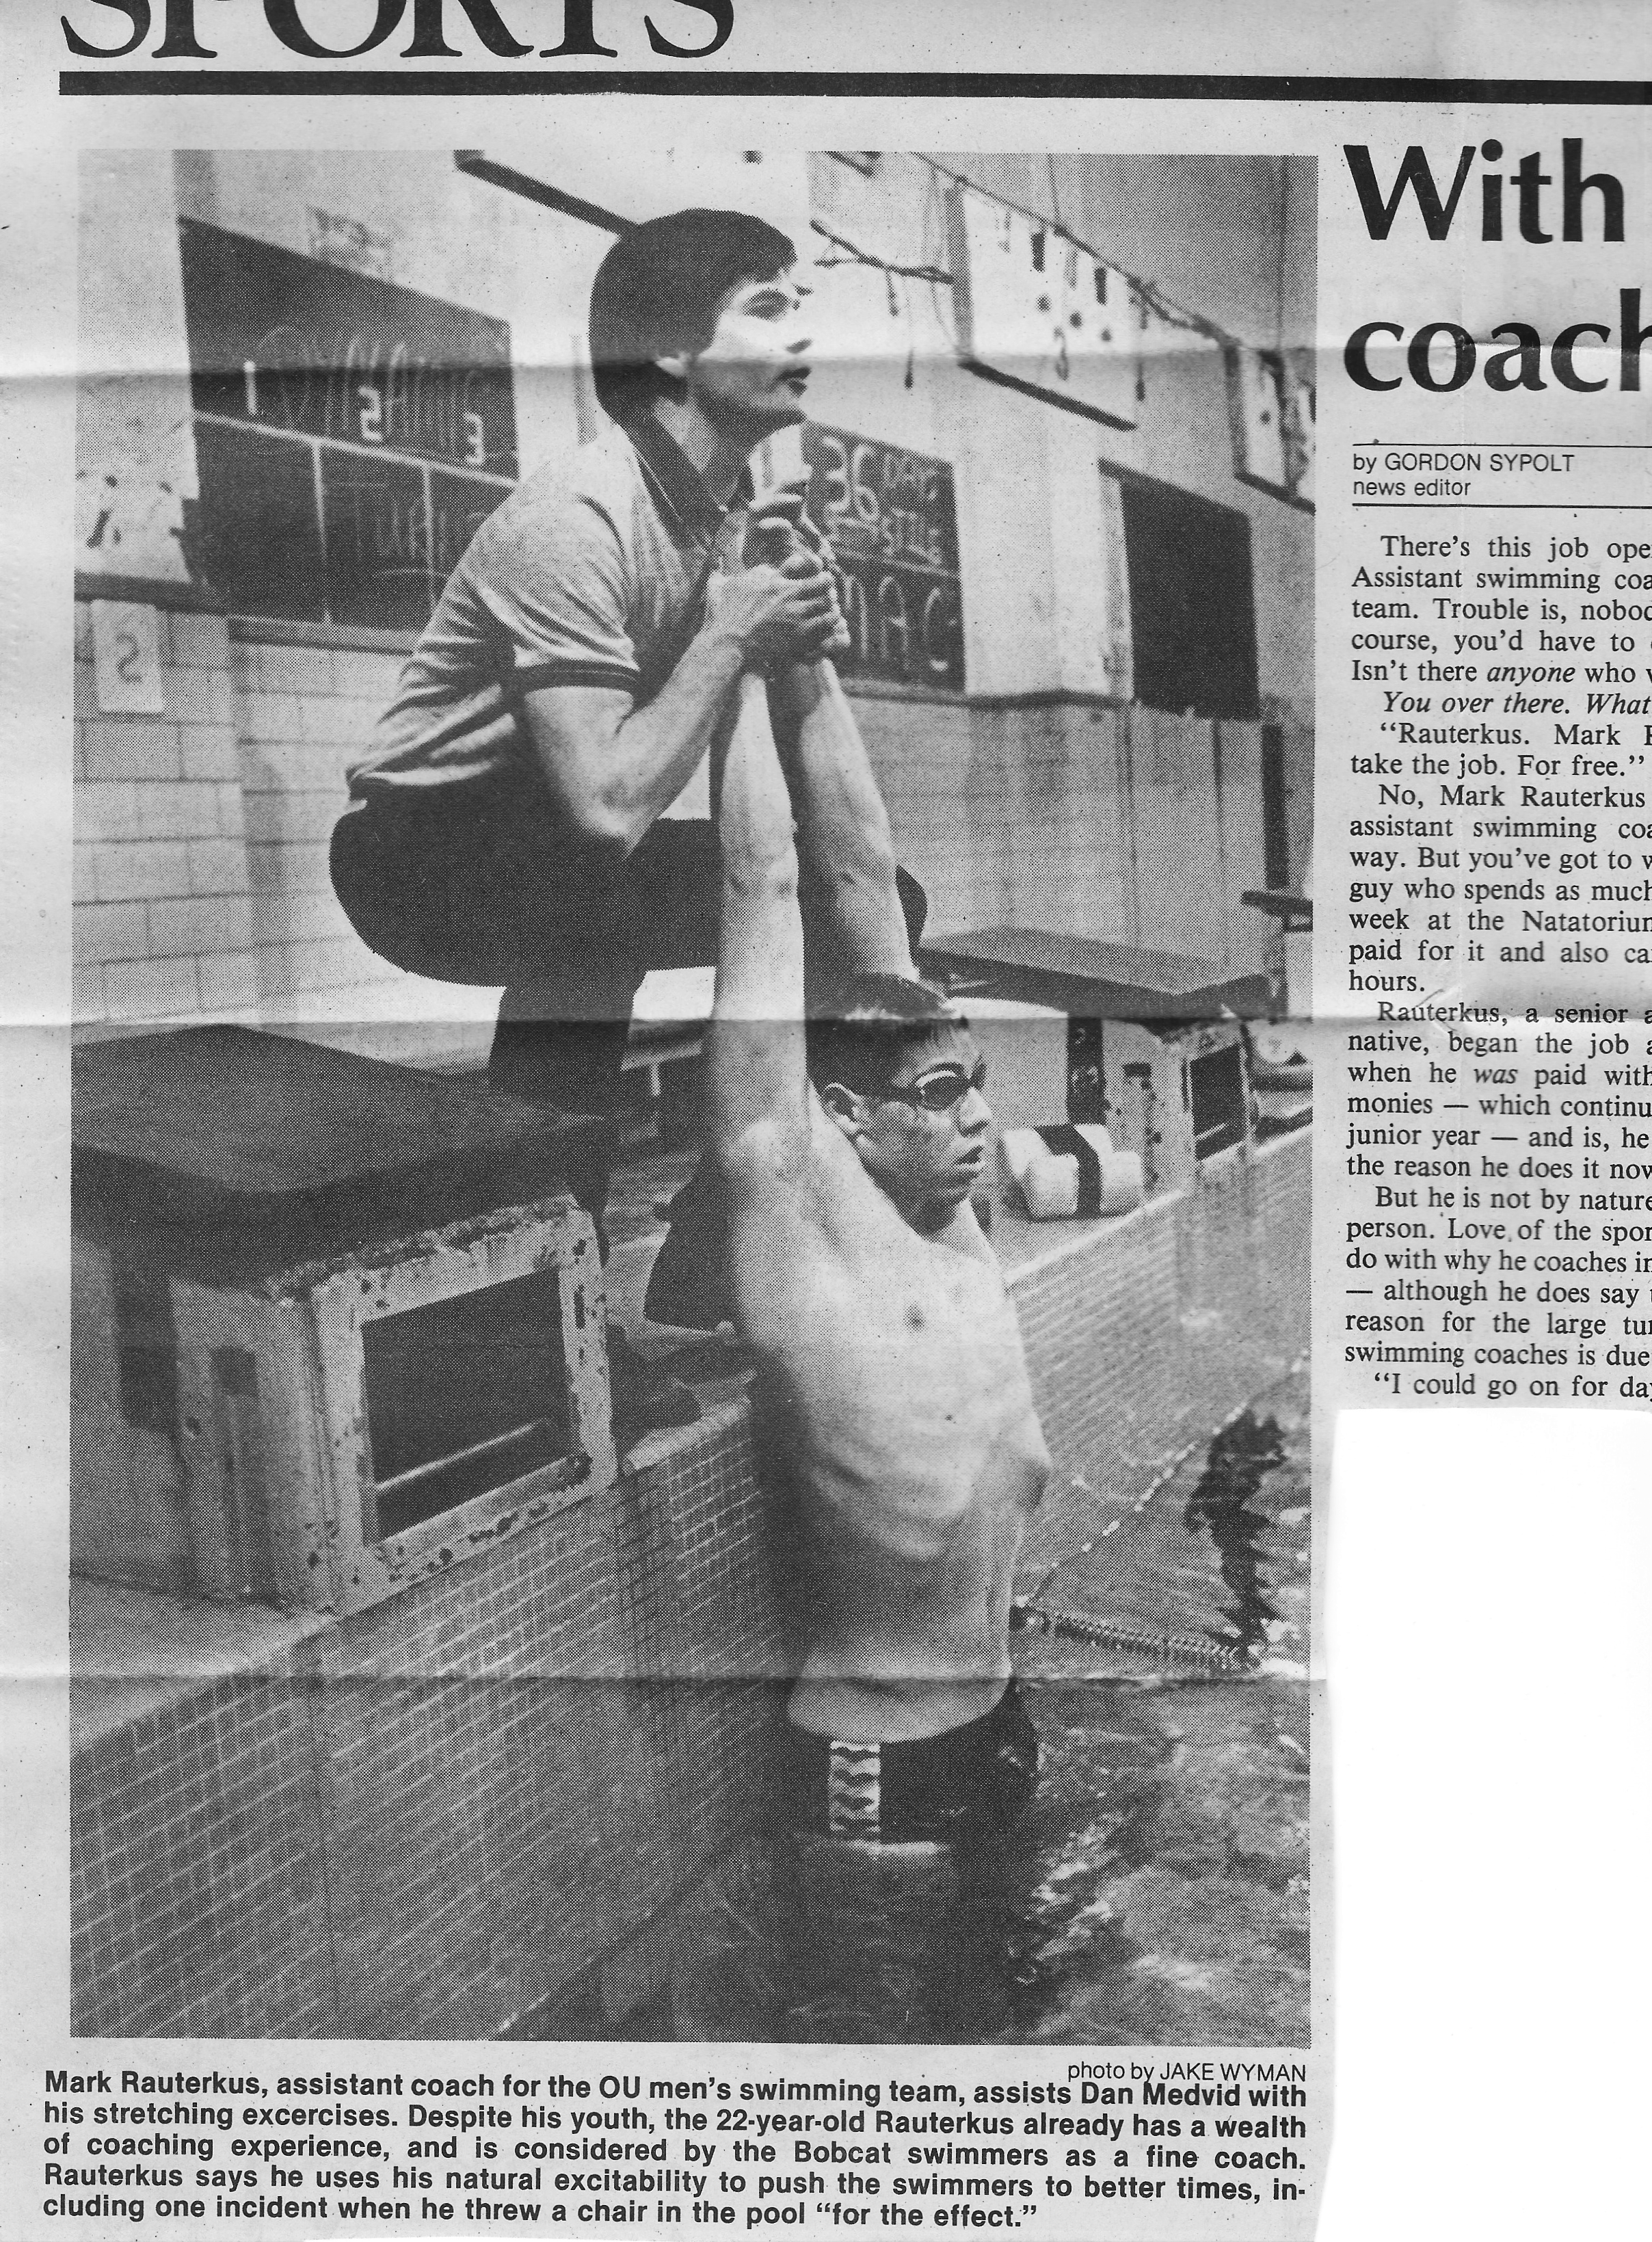 Photo of swimmer being stretched in the old OU swim pool